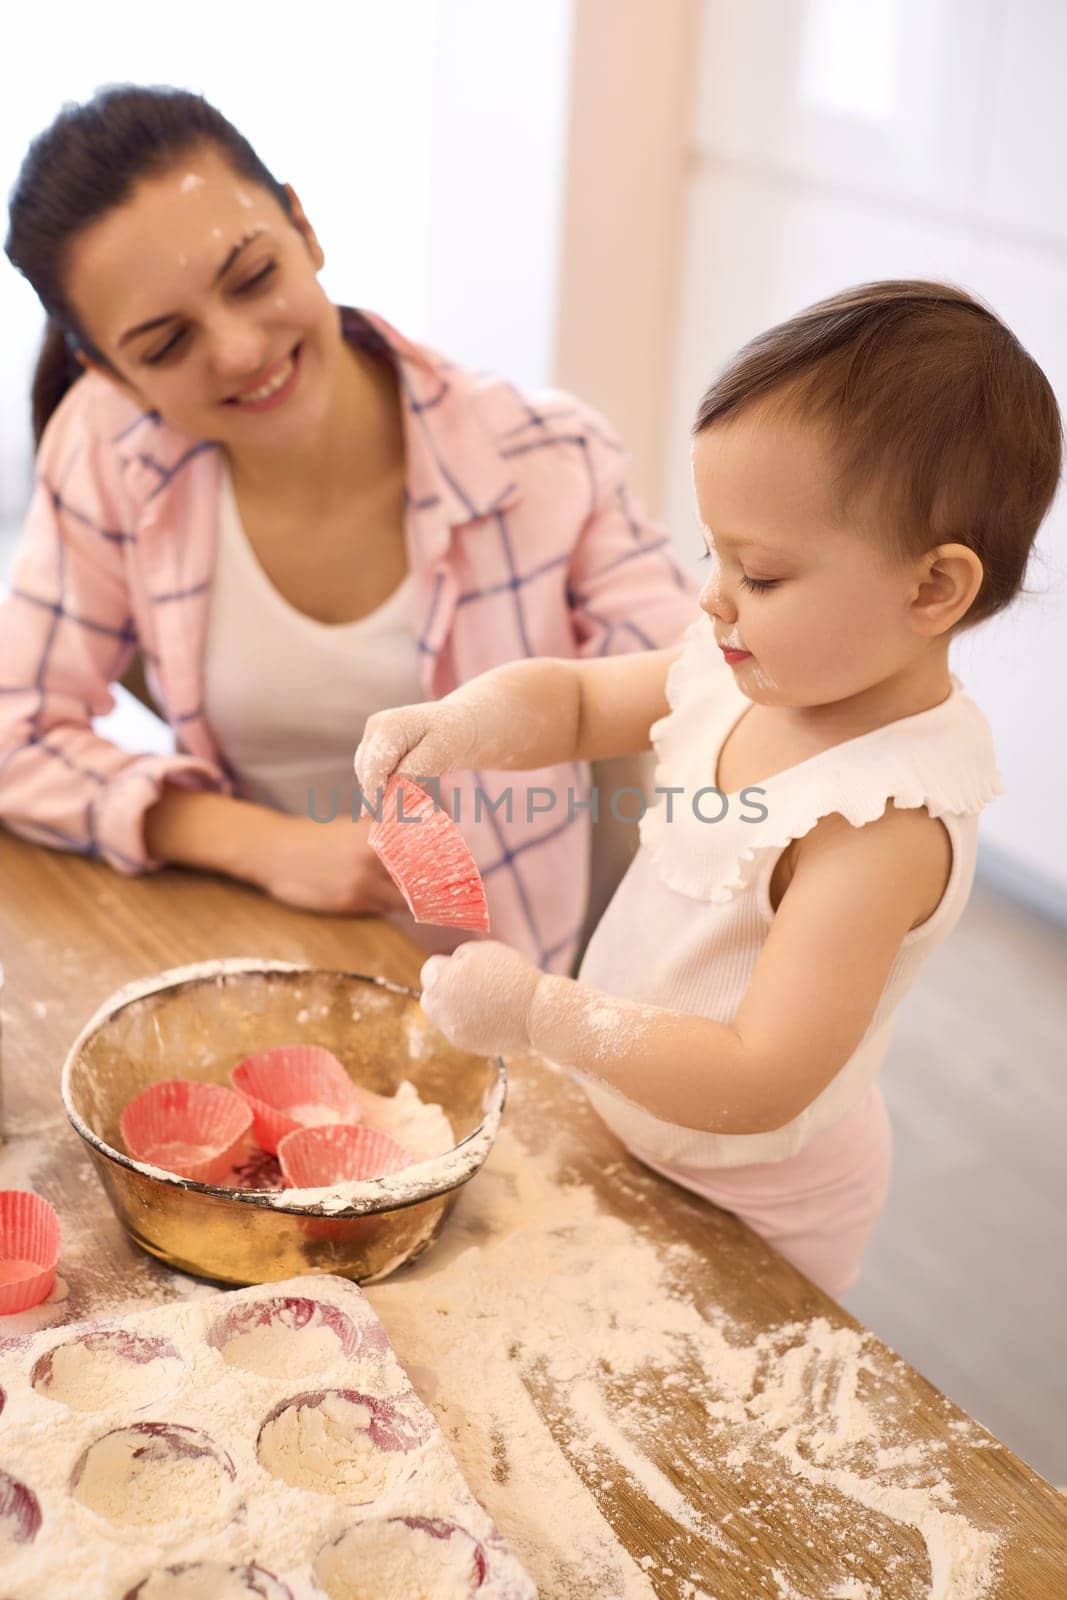 smiling mother and little baby girl baking in the kitchen, bake cookies. happy time together